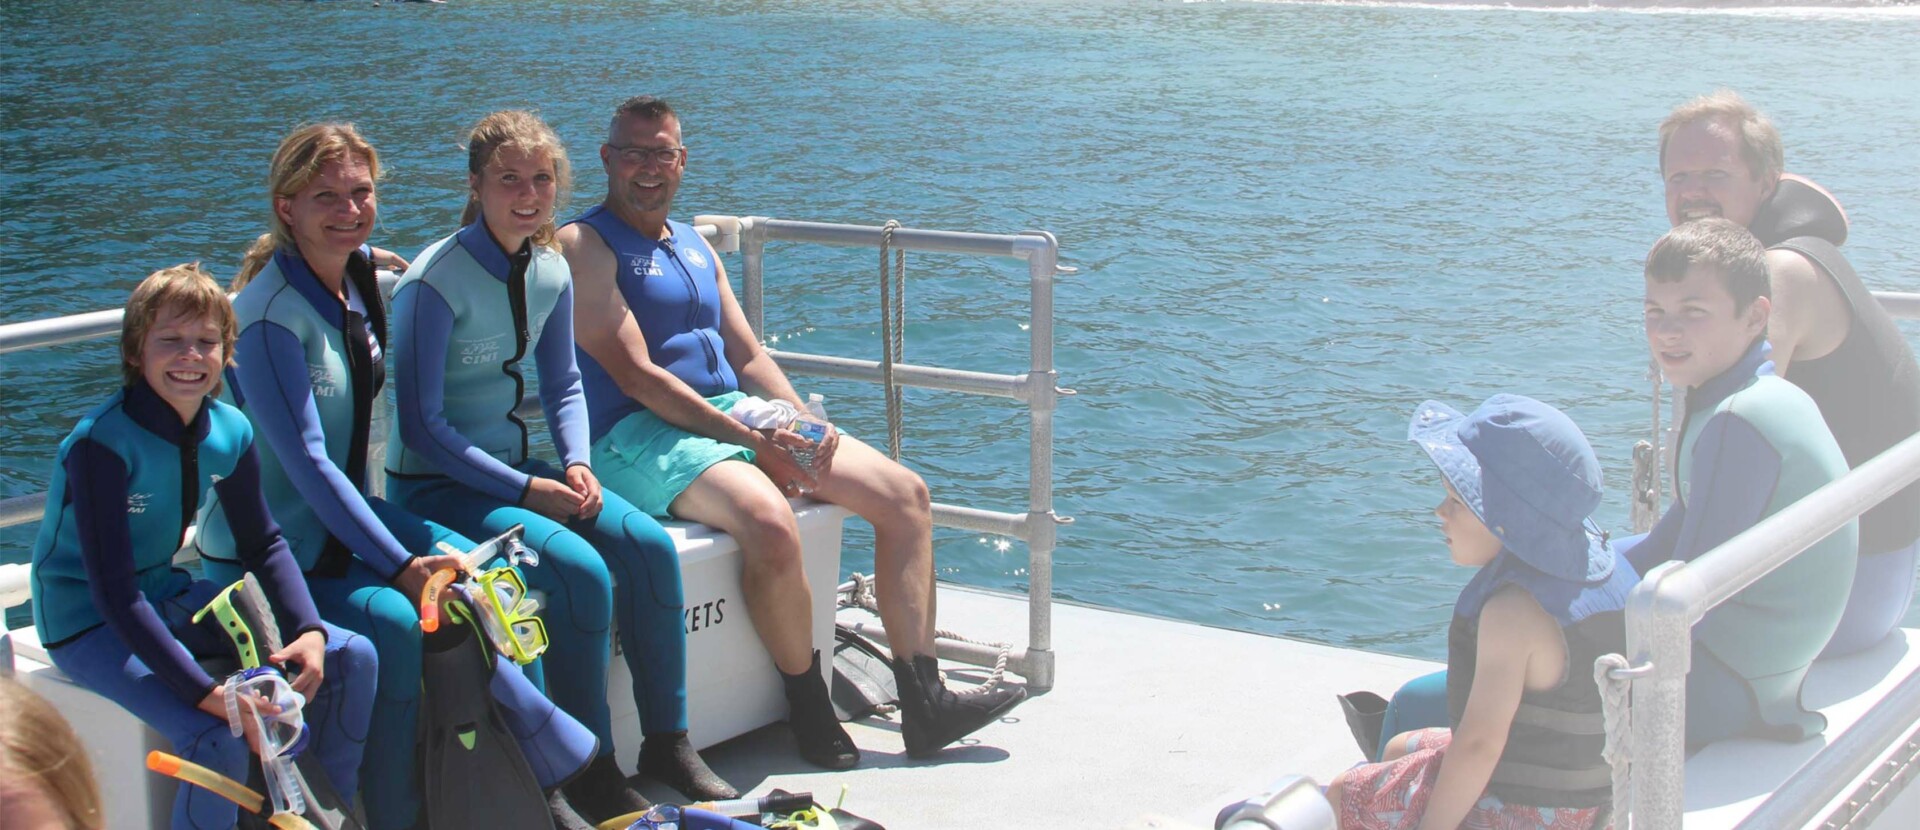 Snorkel group on boat.